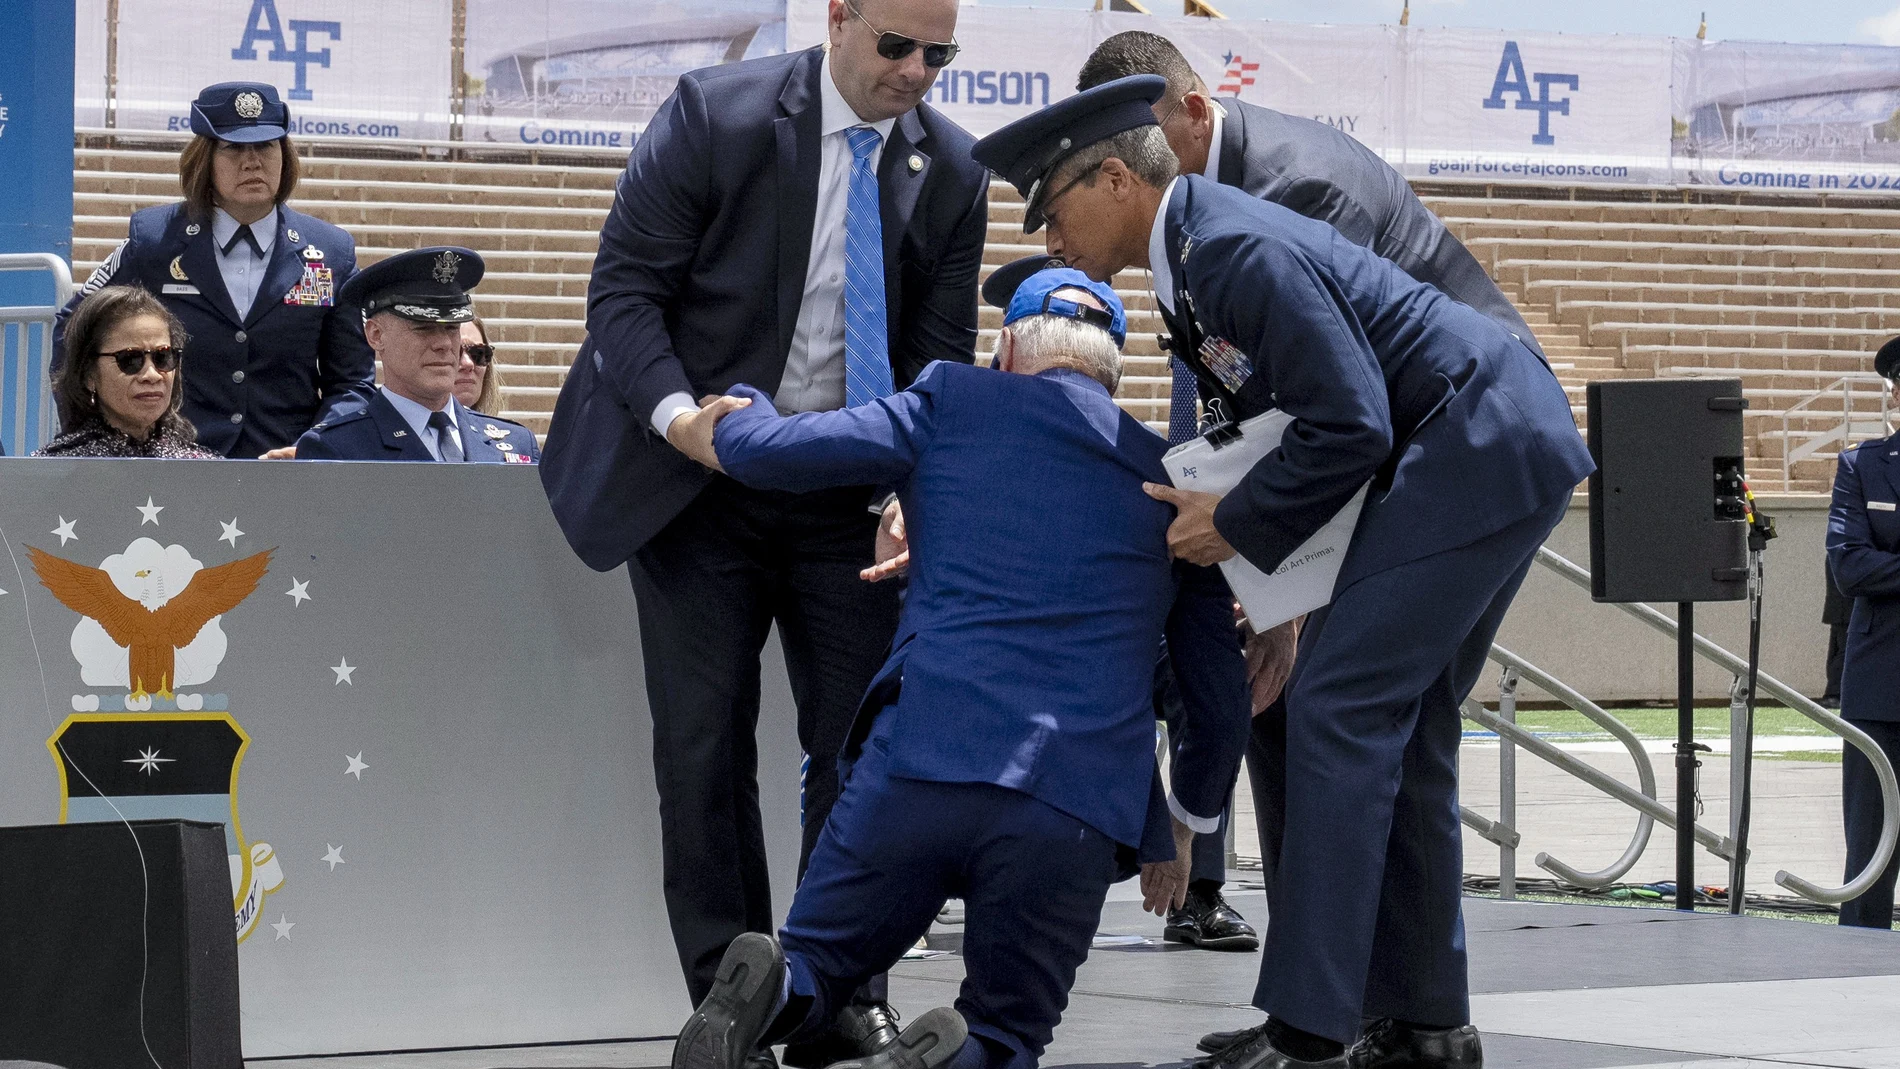 President Joe Biden falls on stage during the 2023 United States Air Force Academy Graduation Ceremony at Falcon Stadium, Thursday, June 1, 2023, at the United States Air Force Academy in Colorado Springs, 